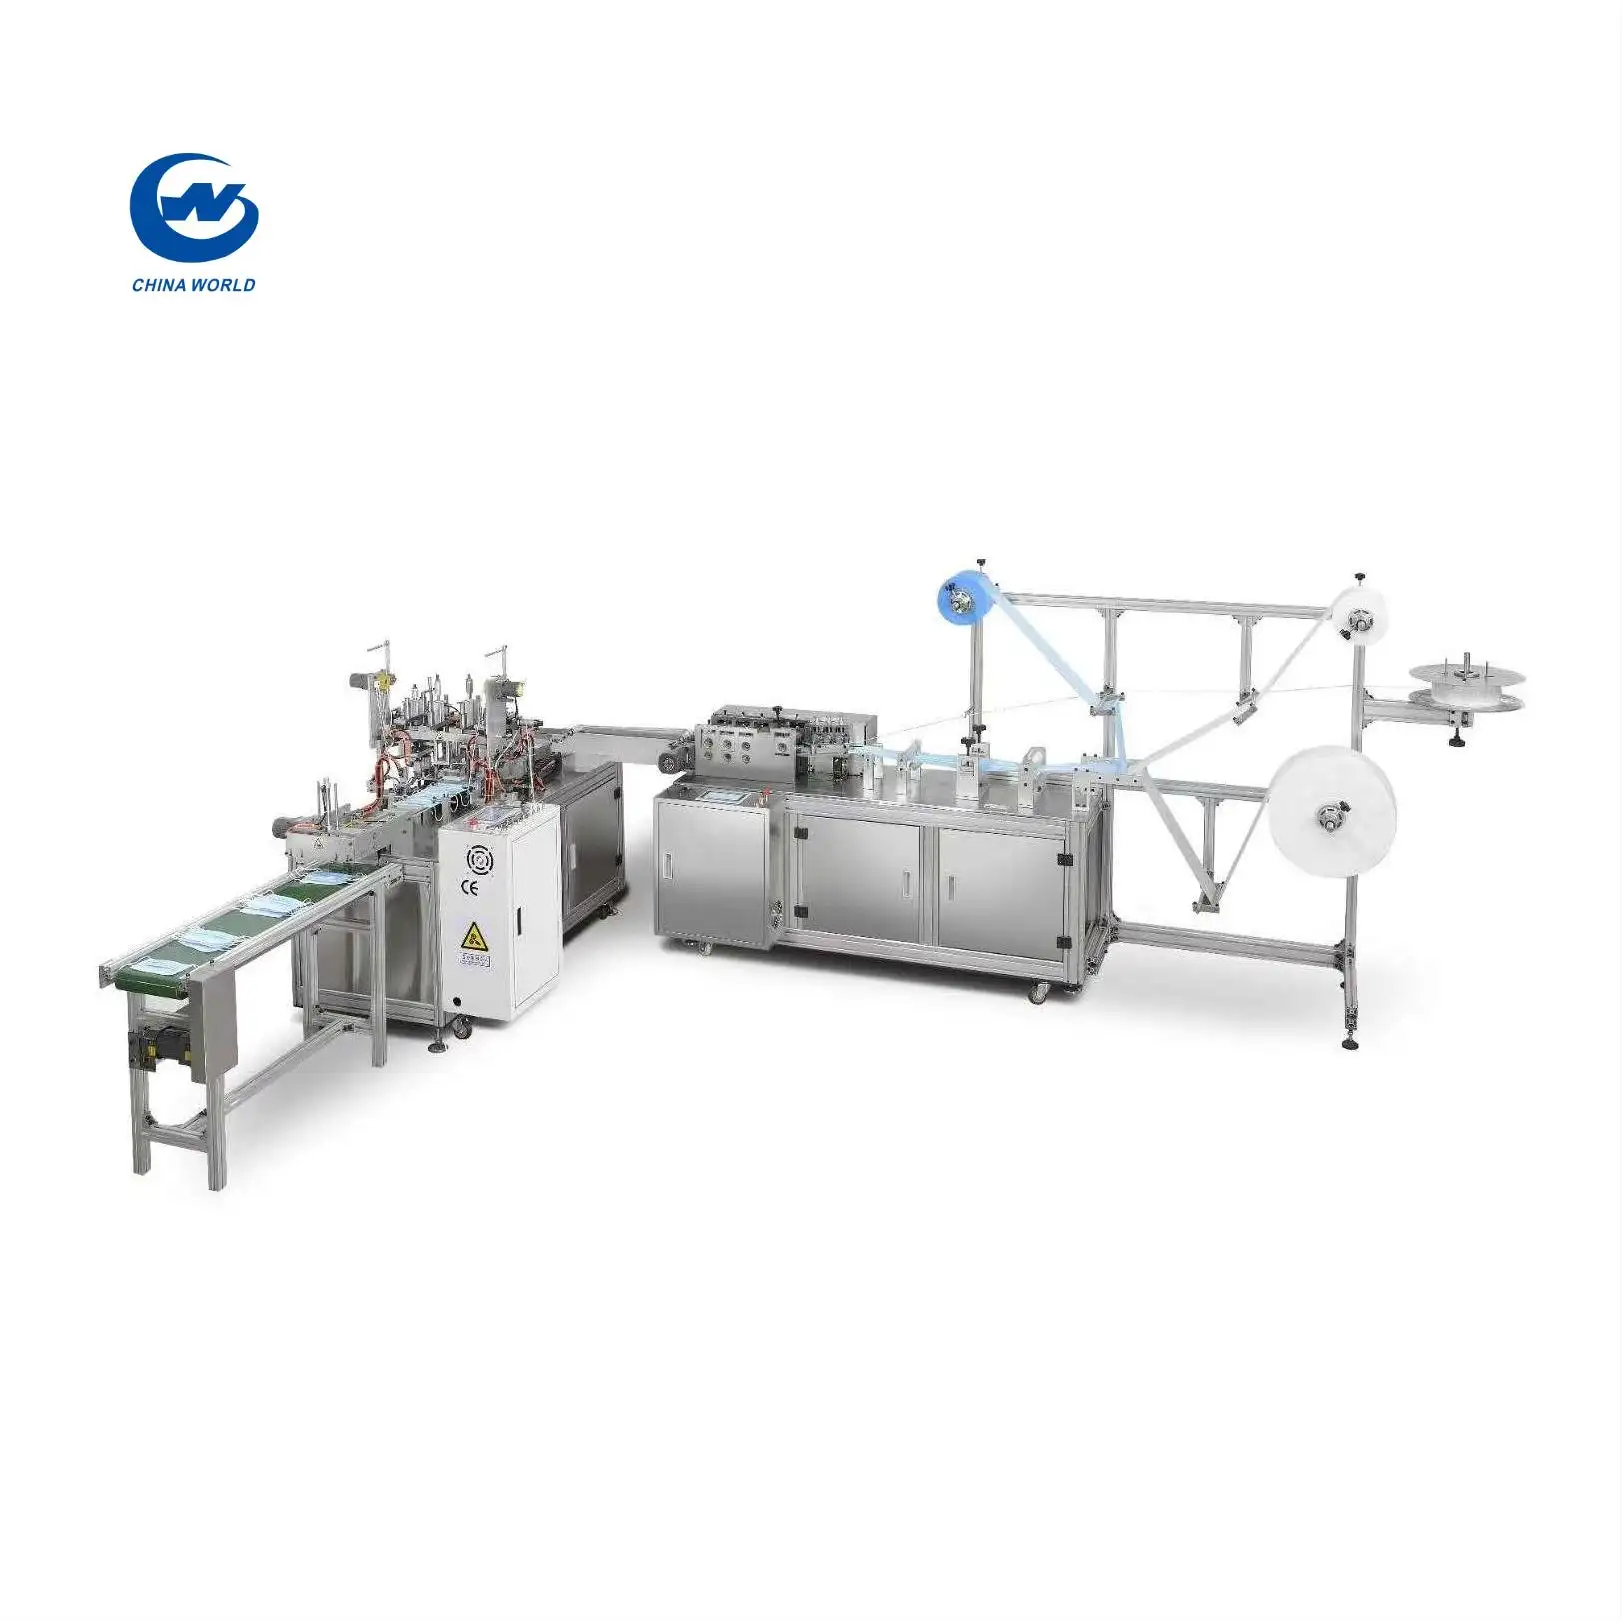 Face Mask Blank Making Machine/Automatic Face Mask Manufacturing Machine Non-woven Disposable Face Mask Machine